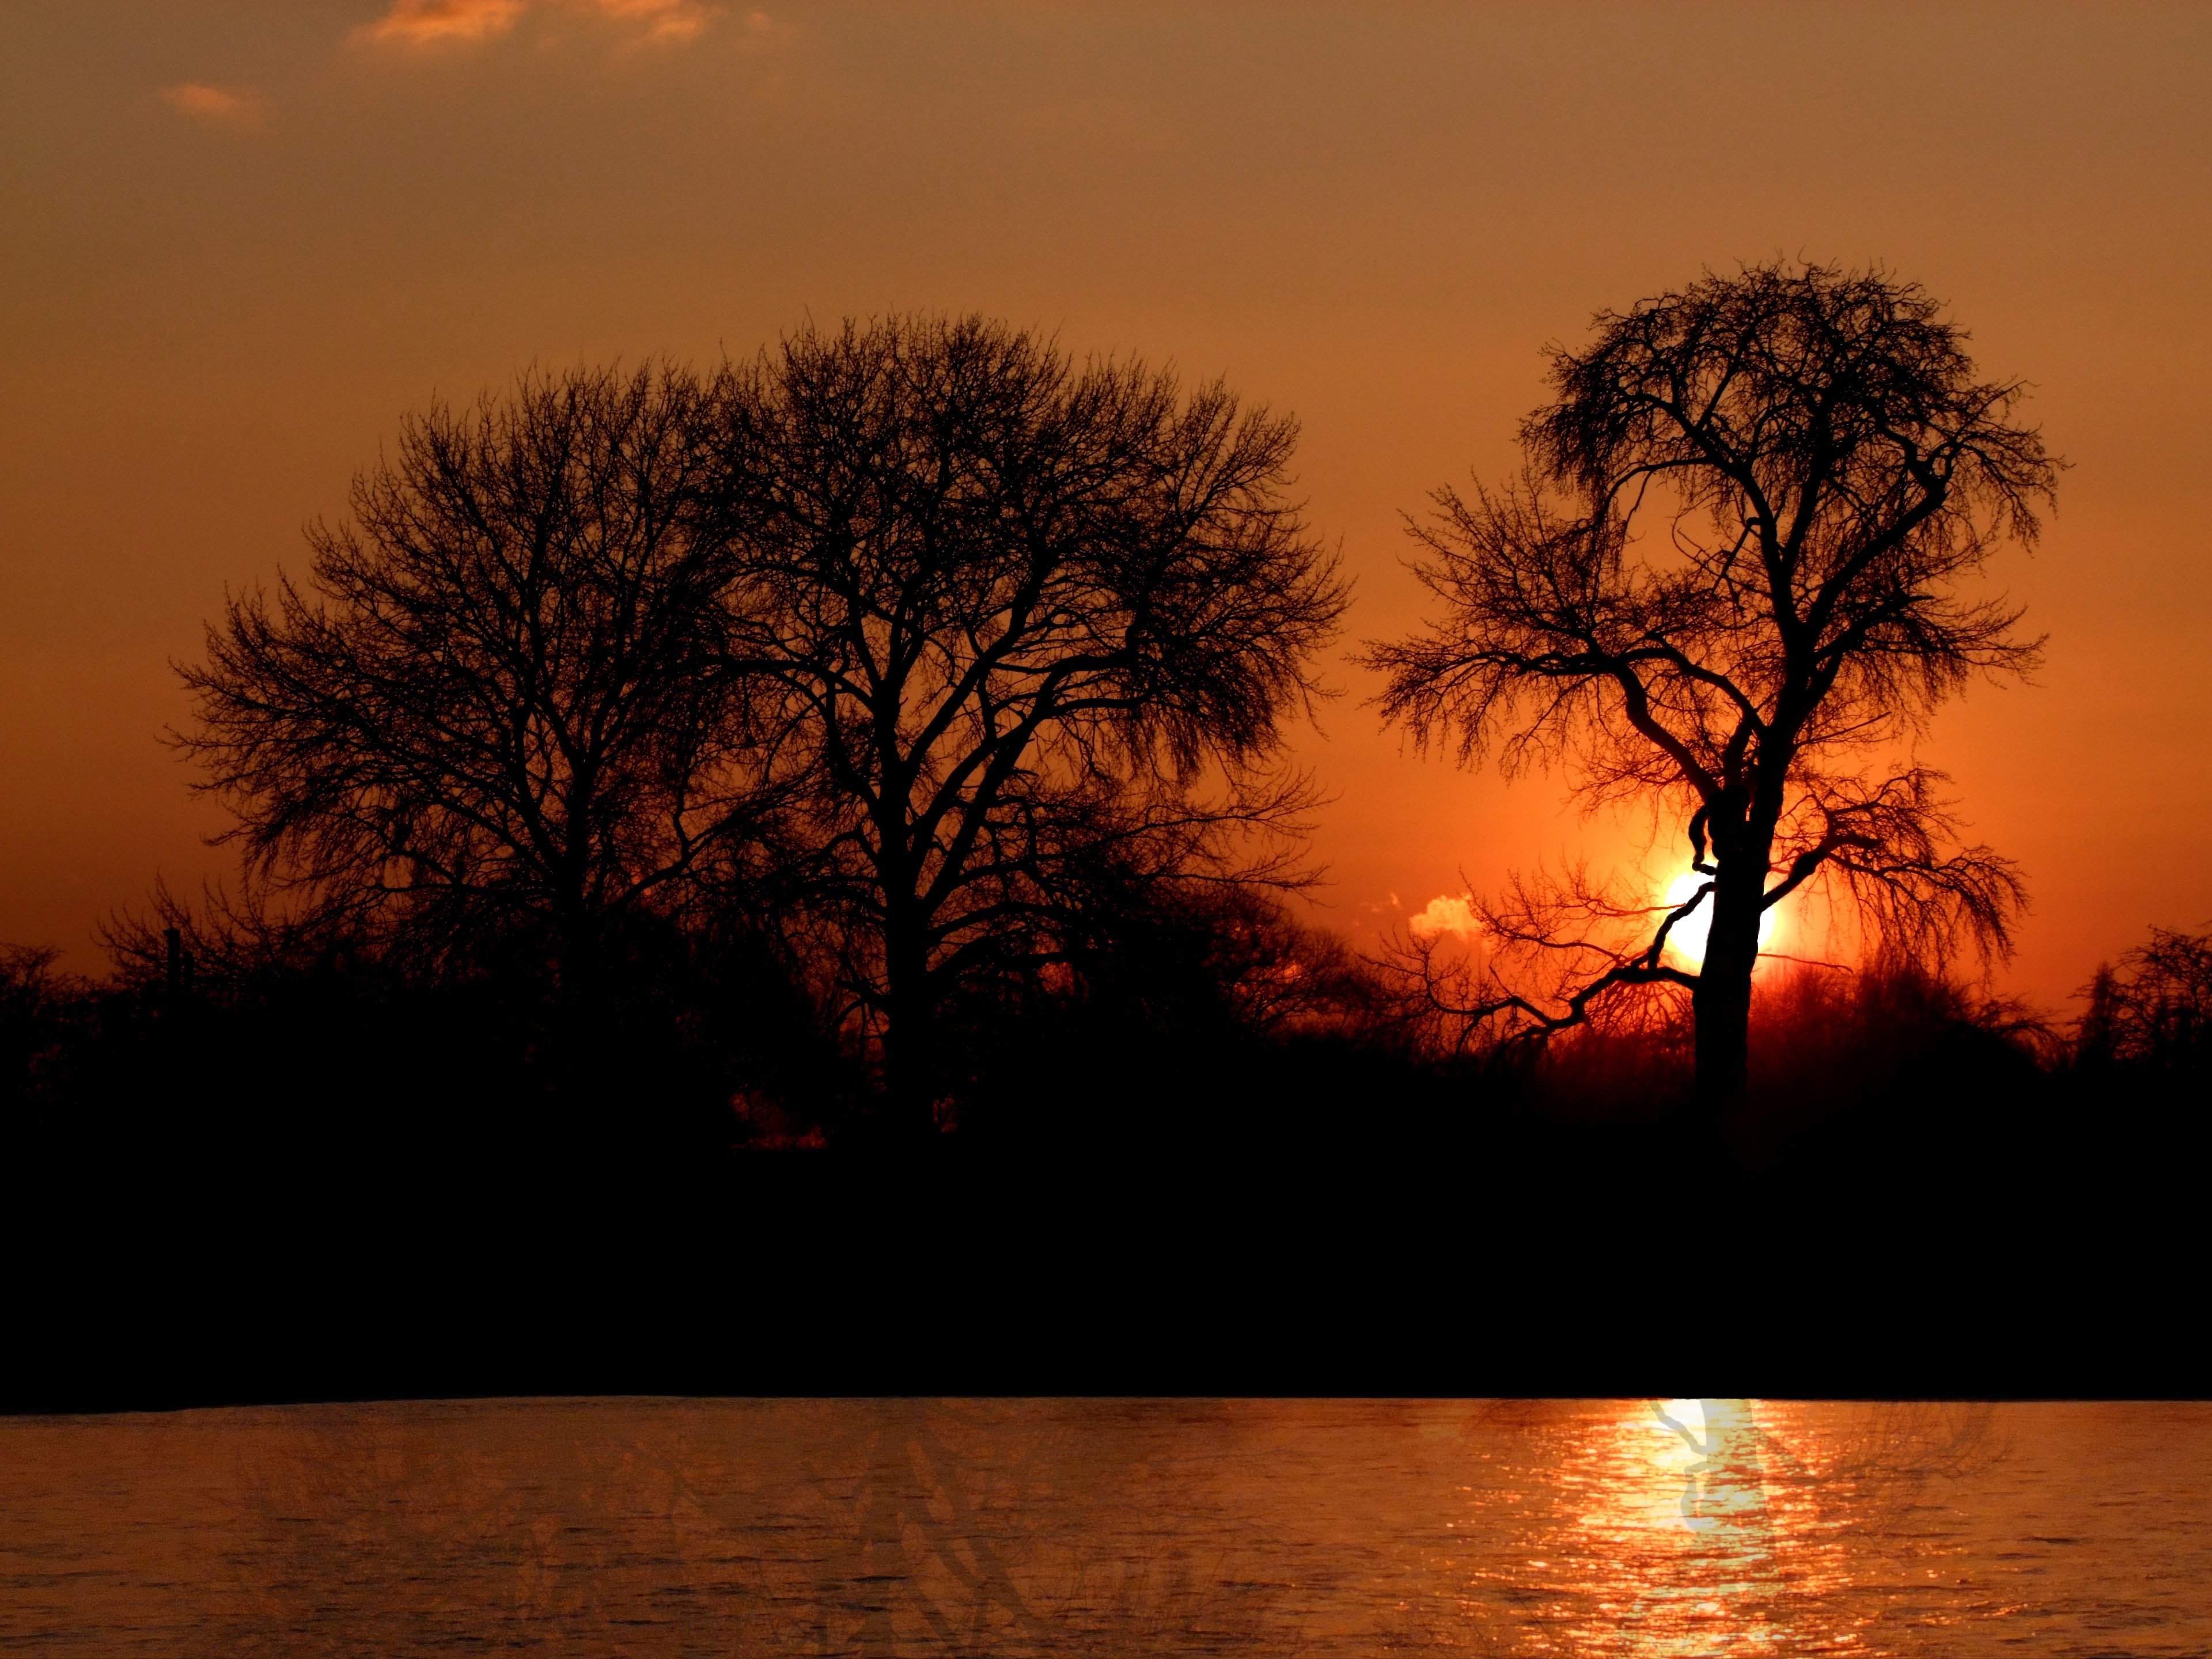 silhouette of trees near body of water during golden hour